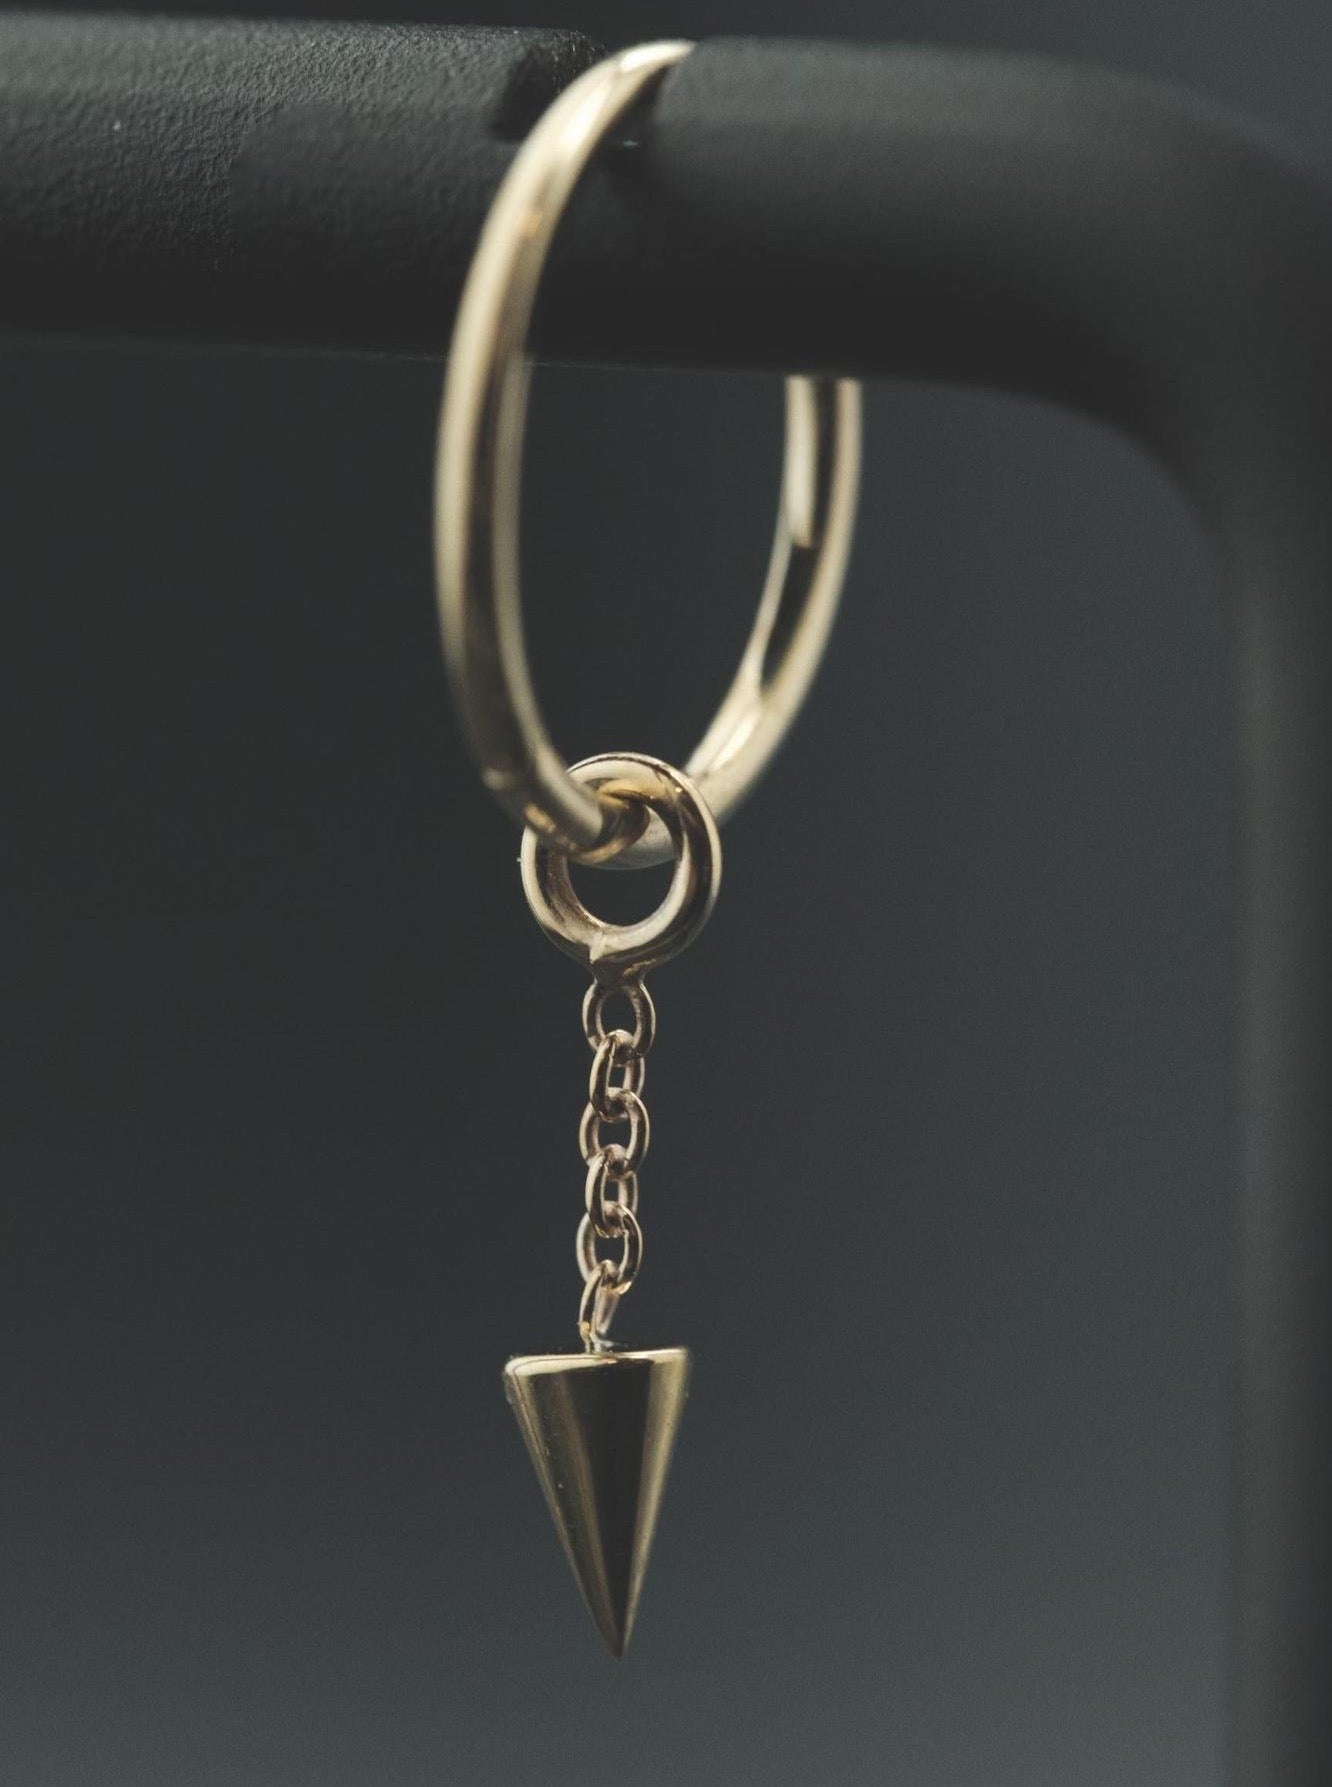 Spike Charm with Chain in 14k Yellow Gold by BVLA